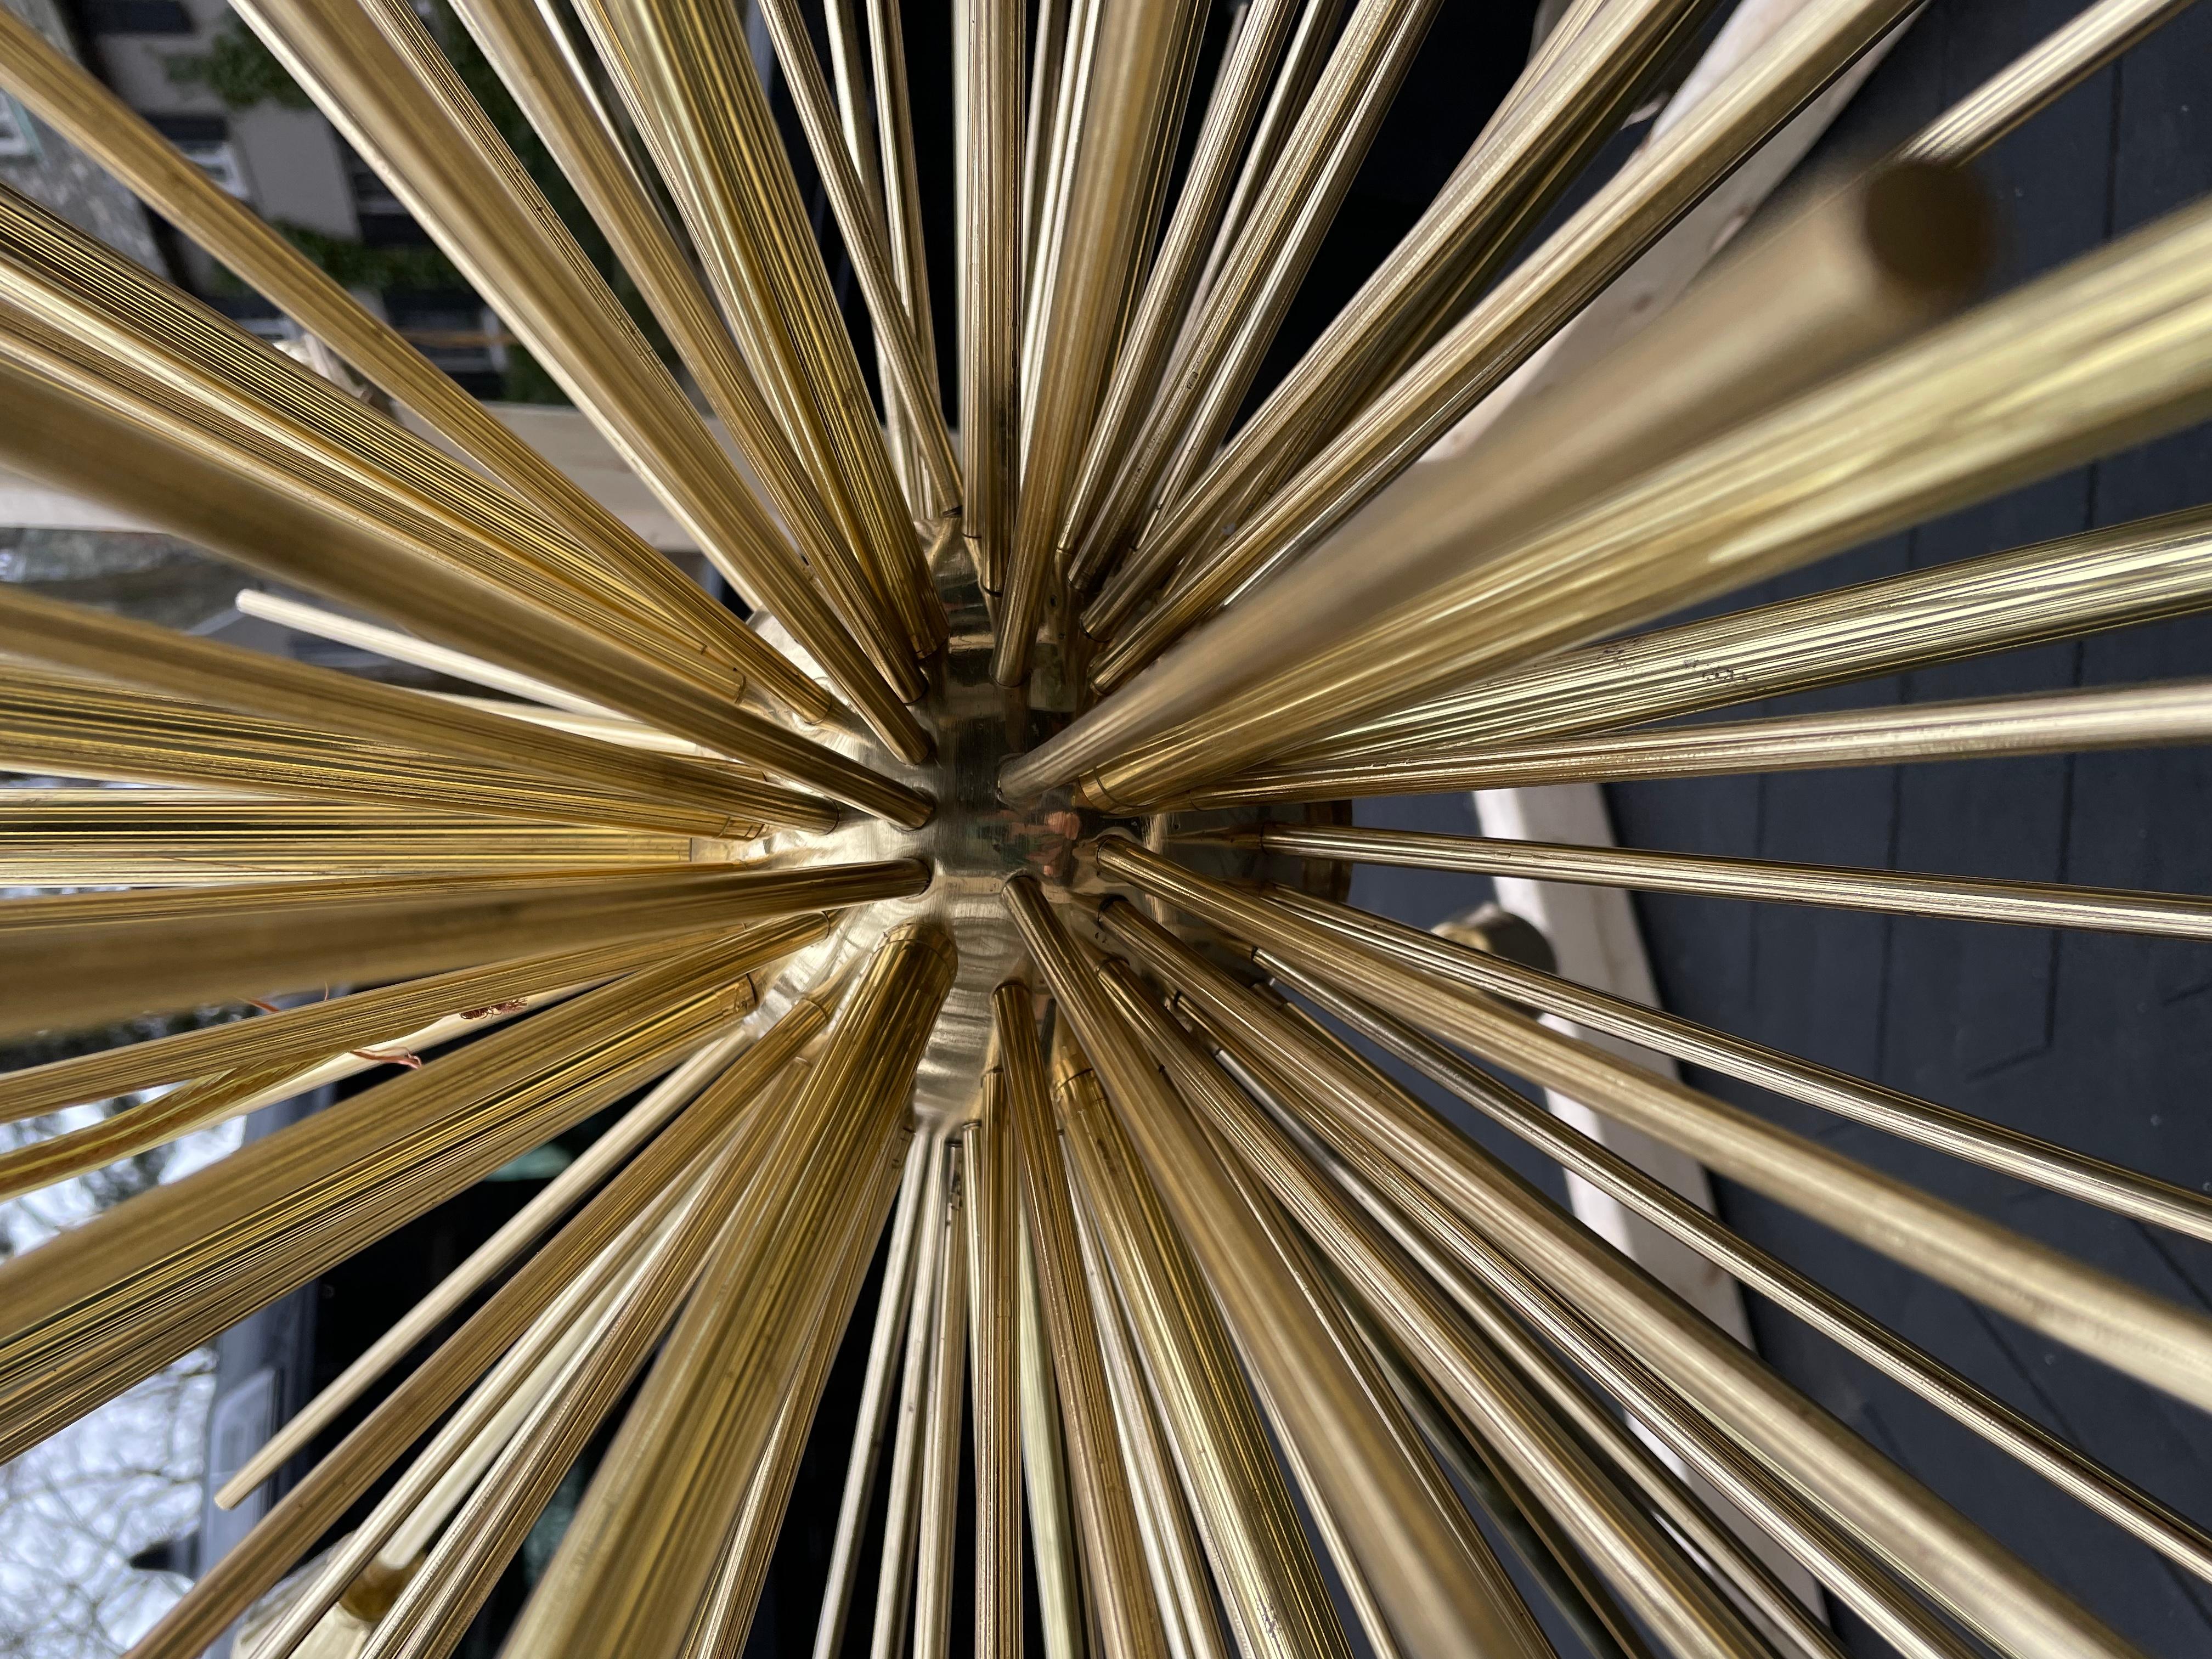 A fabulous 25 socket mid century brass Sputnik chandelier having completely rewired sockets, cleaned, polished and lacquered. It is photographed in a wooden frame that was built for transport. The vertical pole and canopy measure 20